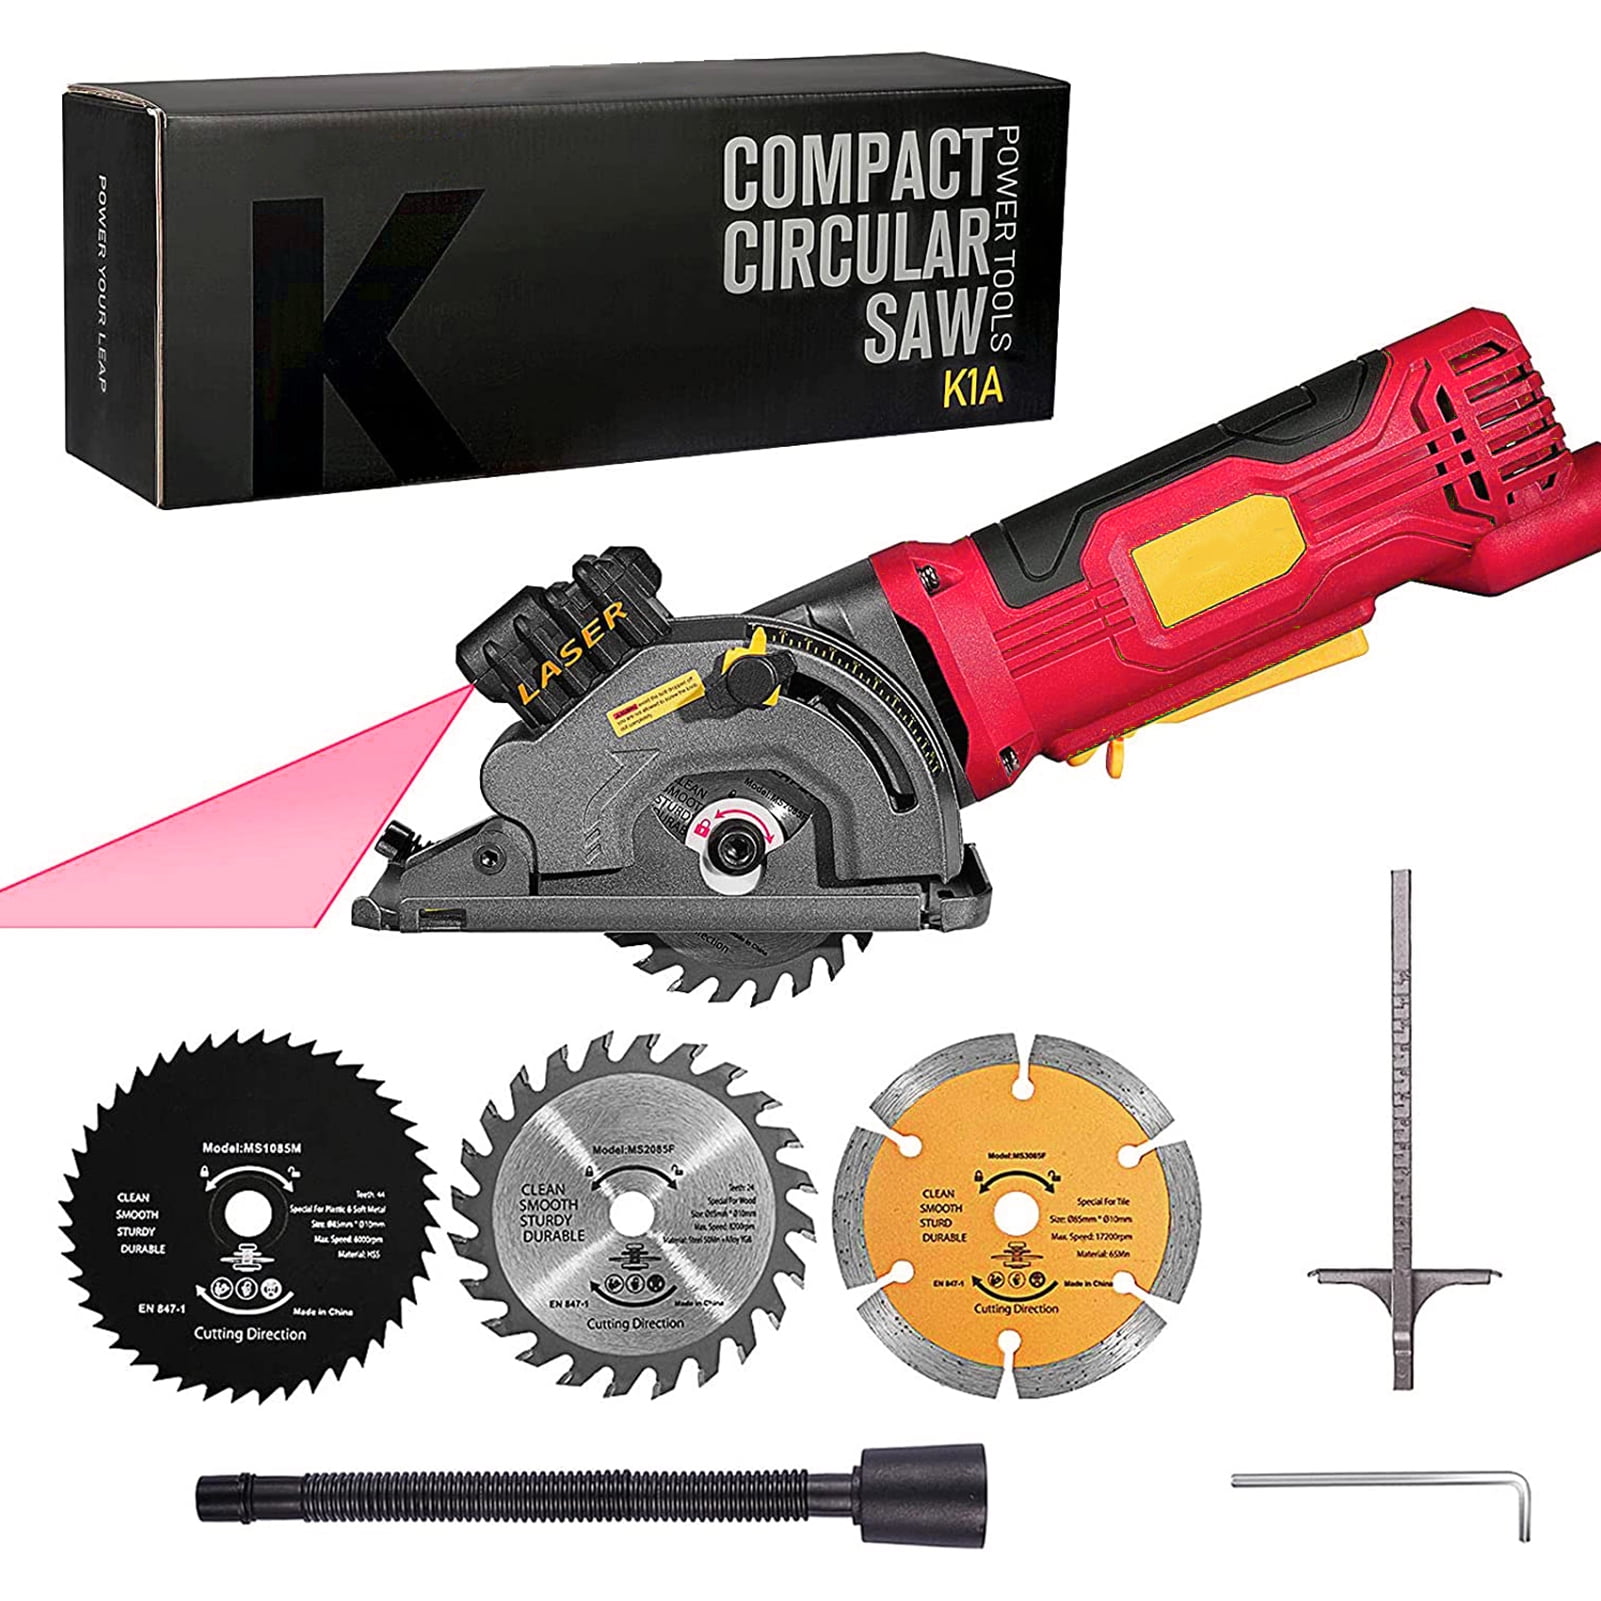 Circular Saw, Corded Amps, 480W/3700RPM Mini Compact Circular Saw, with Laser  Guide Scale Ruler/ Vacuum Port Blades for Cutting Wood Tile Plastic Soft  Metal